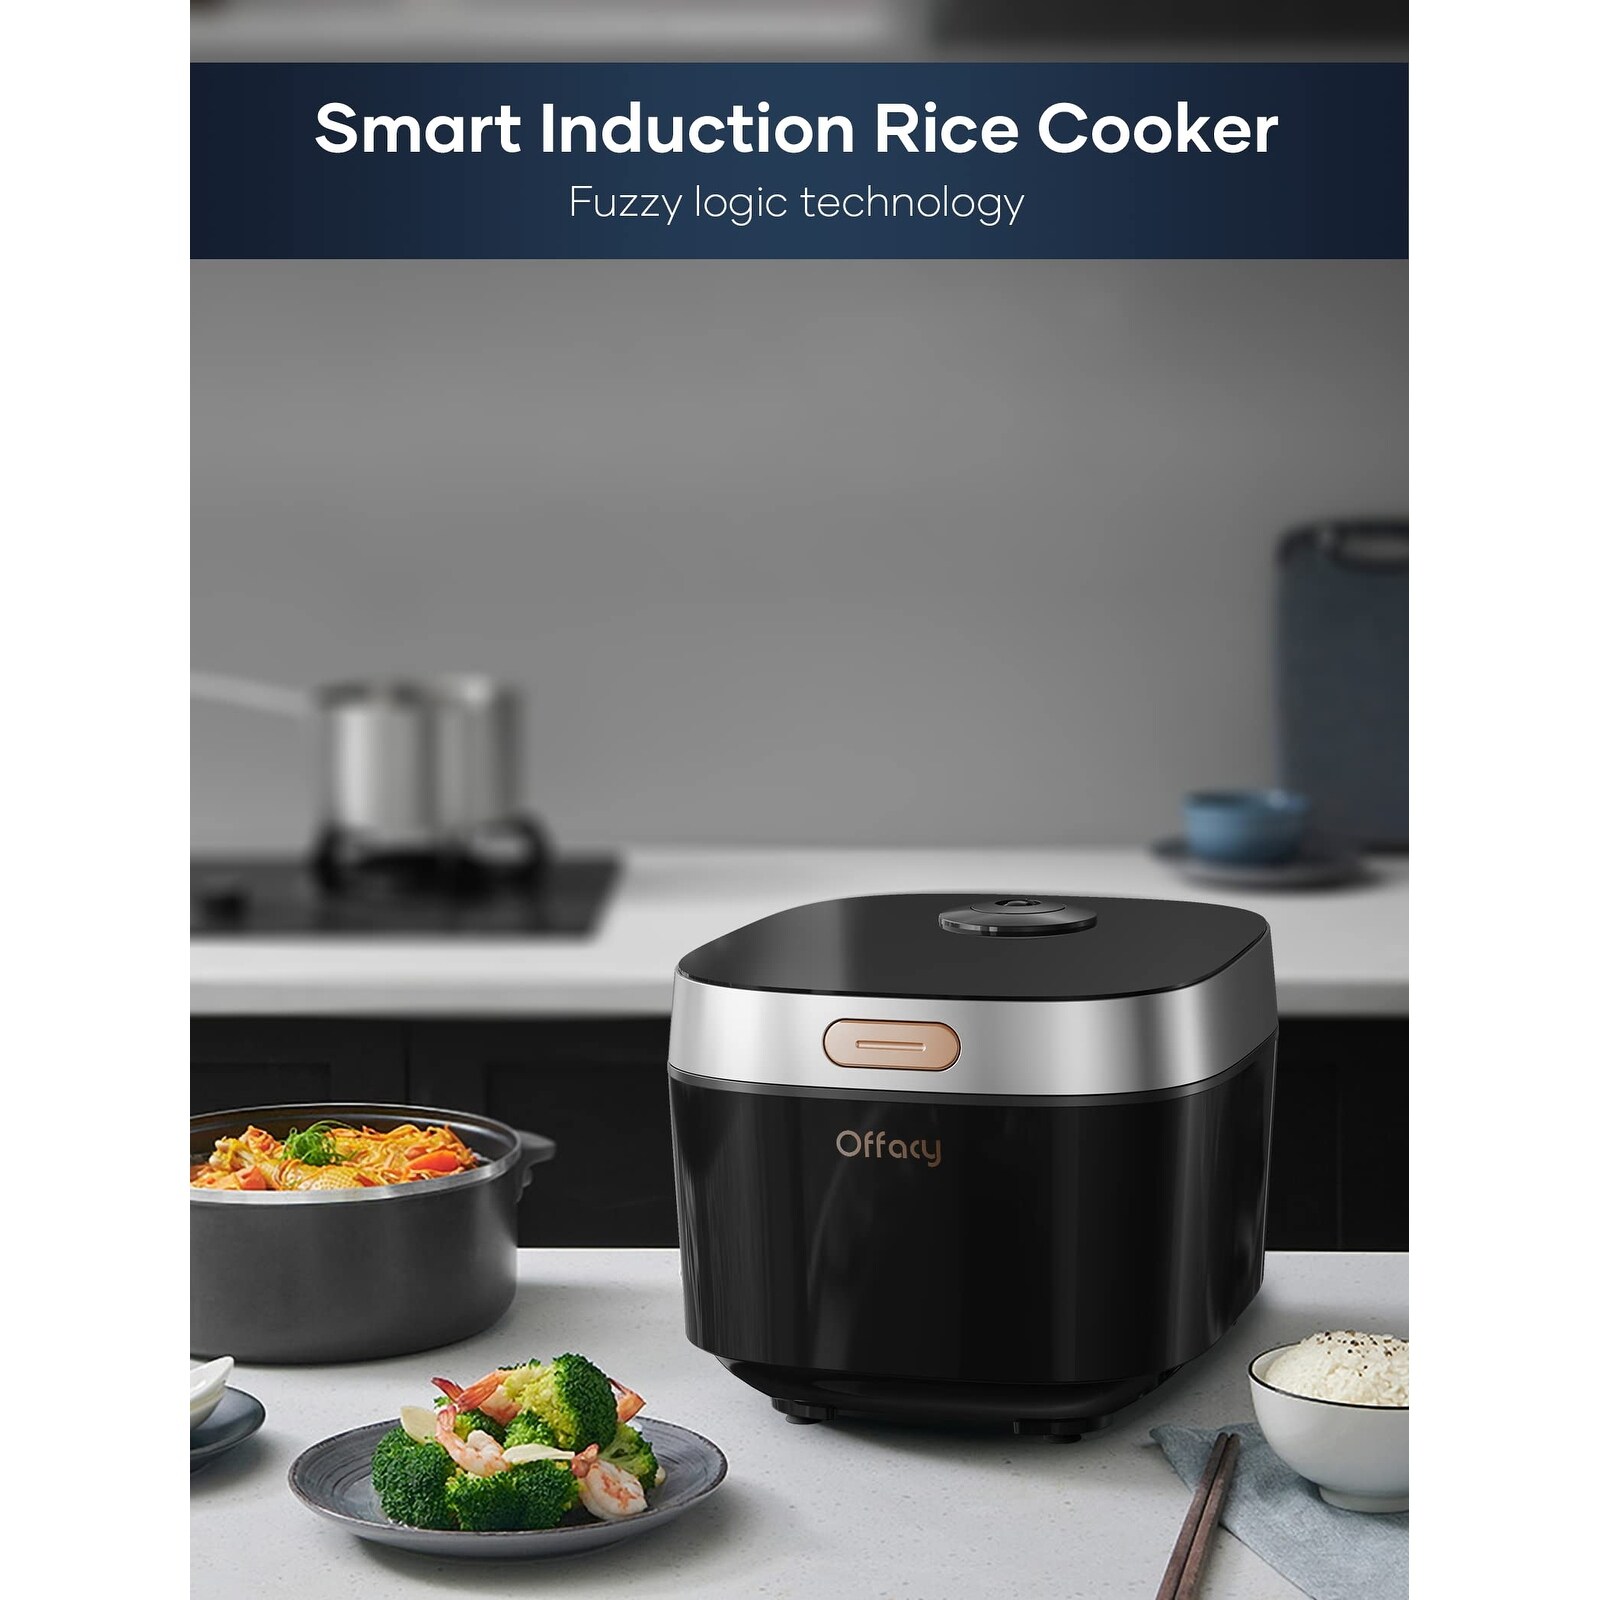 https://ak1.ostkcdn.com/images/products/is/images/direct/027f10eb576a6783df1debed16e520d13aa5f3a3/8-Cups-%28Uncooked%29-Rice-Cooker%2C-Smart-Touch-Panel%2C-24H-Delay-Timer%2C-Auto-Keep-Warm%2C-Nonstick-Inner-Pot%2C-for-Rice%2C-Sushi%2C-Porridge.jpg